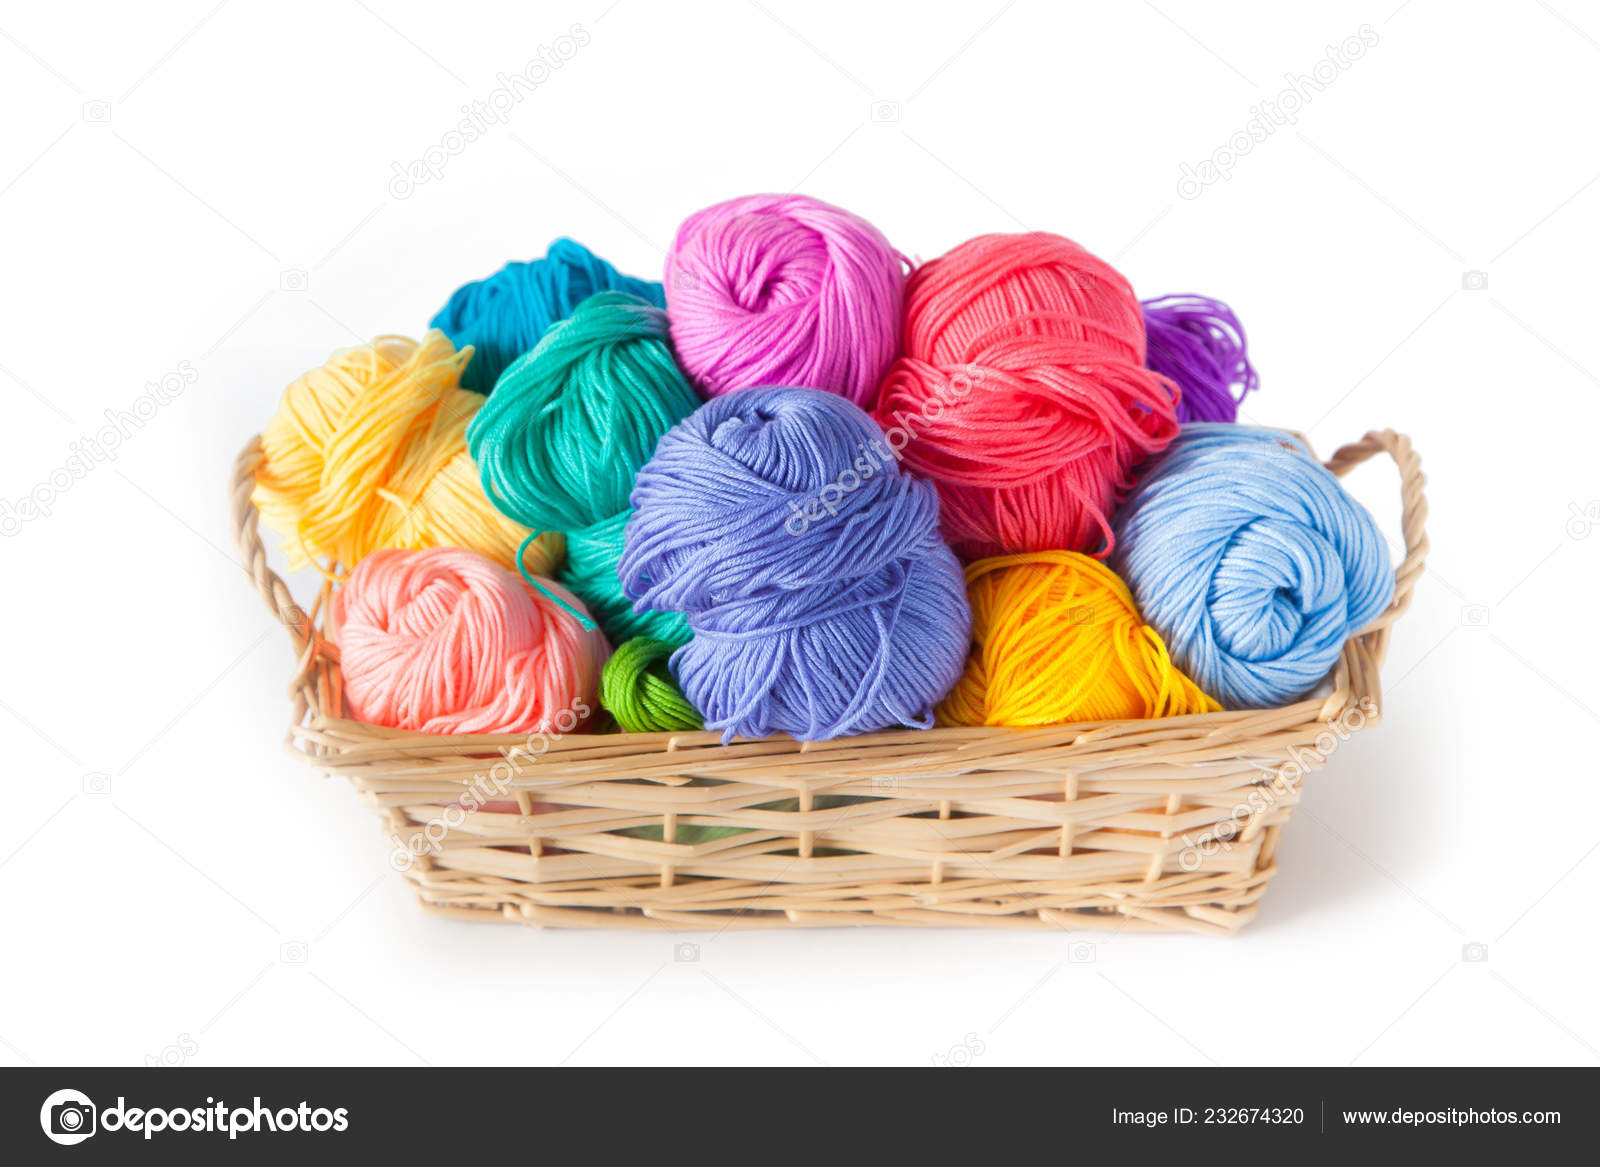 Yarns in Basket with Crochet Hooks in Harmonious Colors. Knitting, Crocheting  Supplies. Stock Image - Image of color, cotton: 116779833